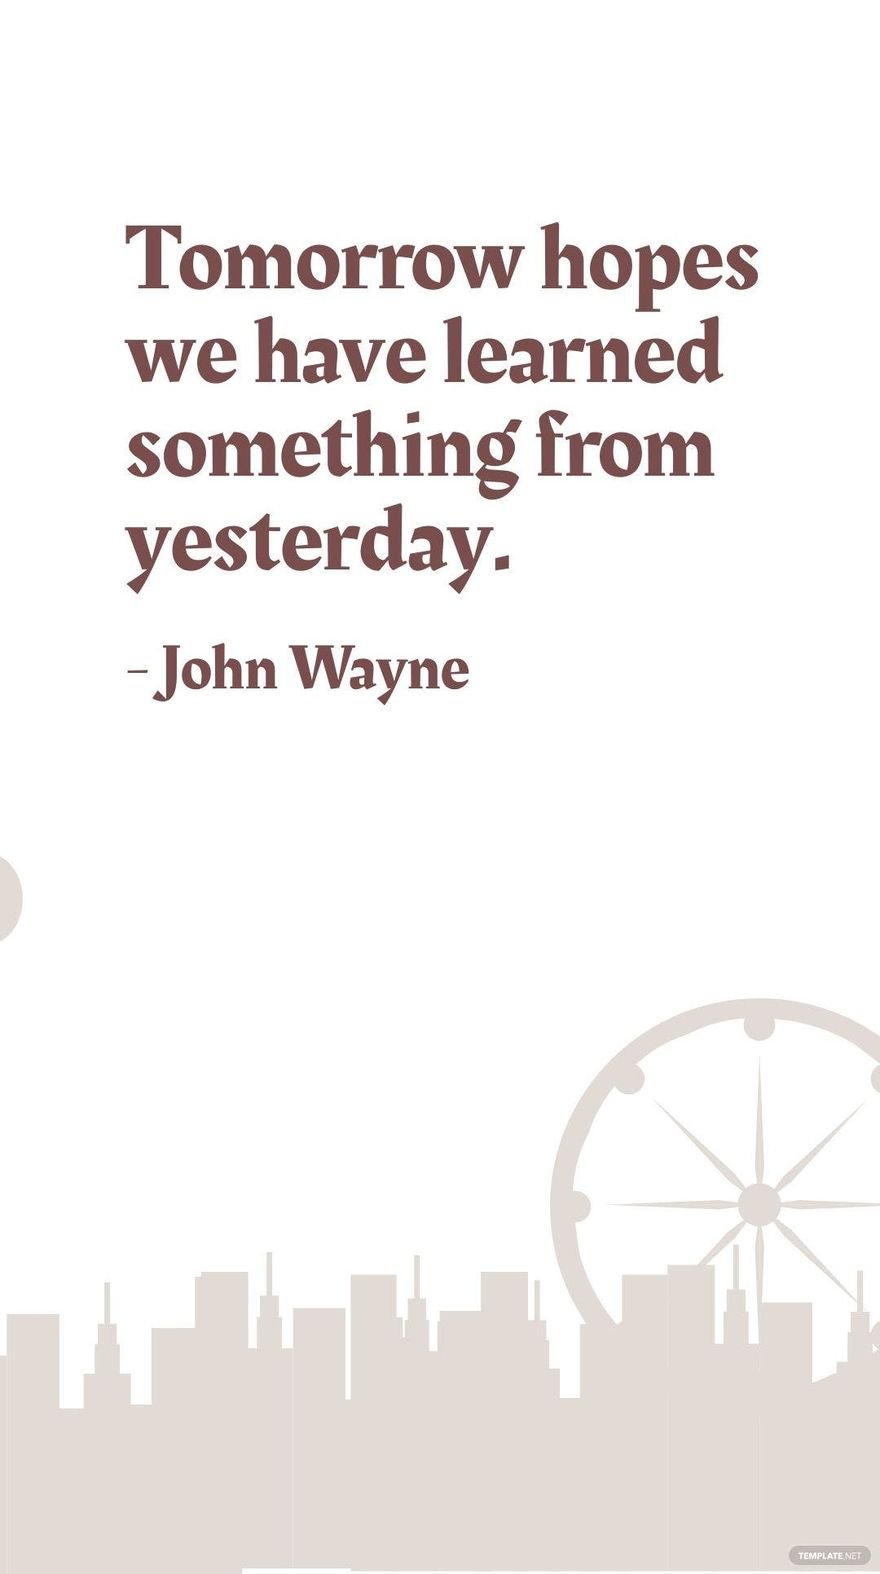 Free John Wayne - Tomorrow hopes we have learned something from yesterday. in JPG